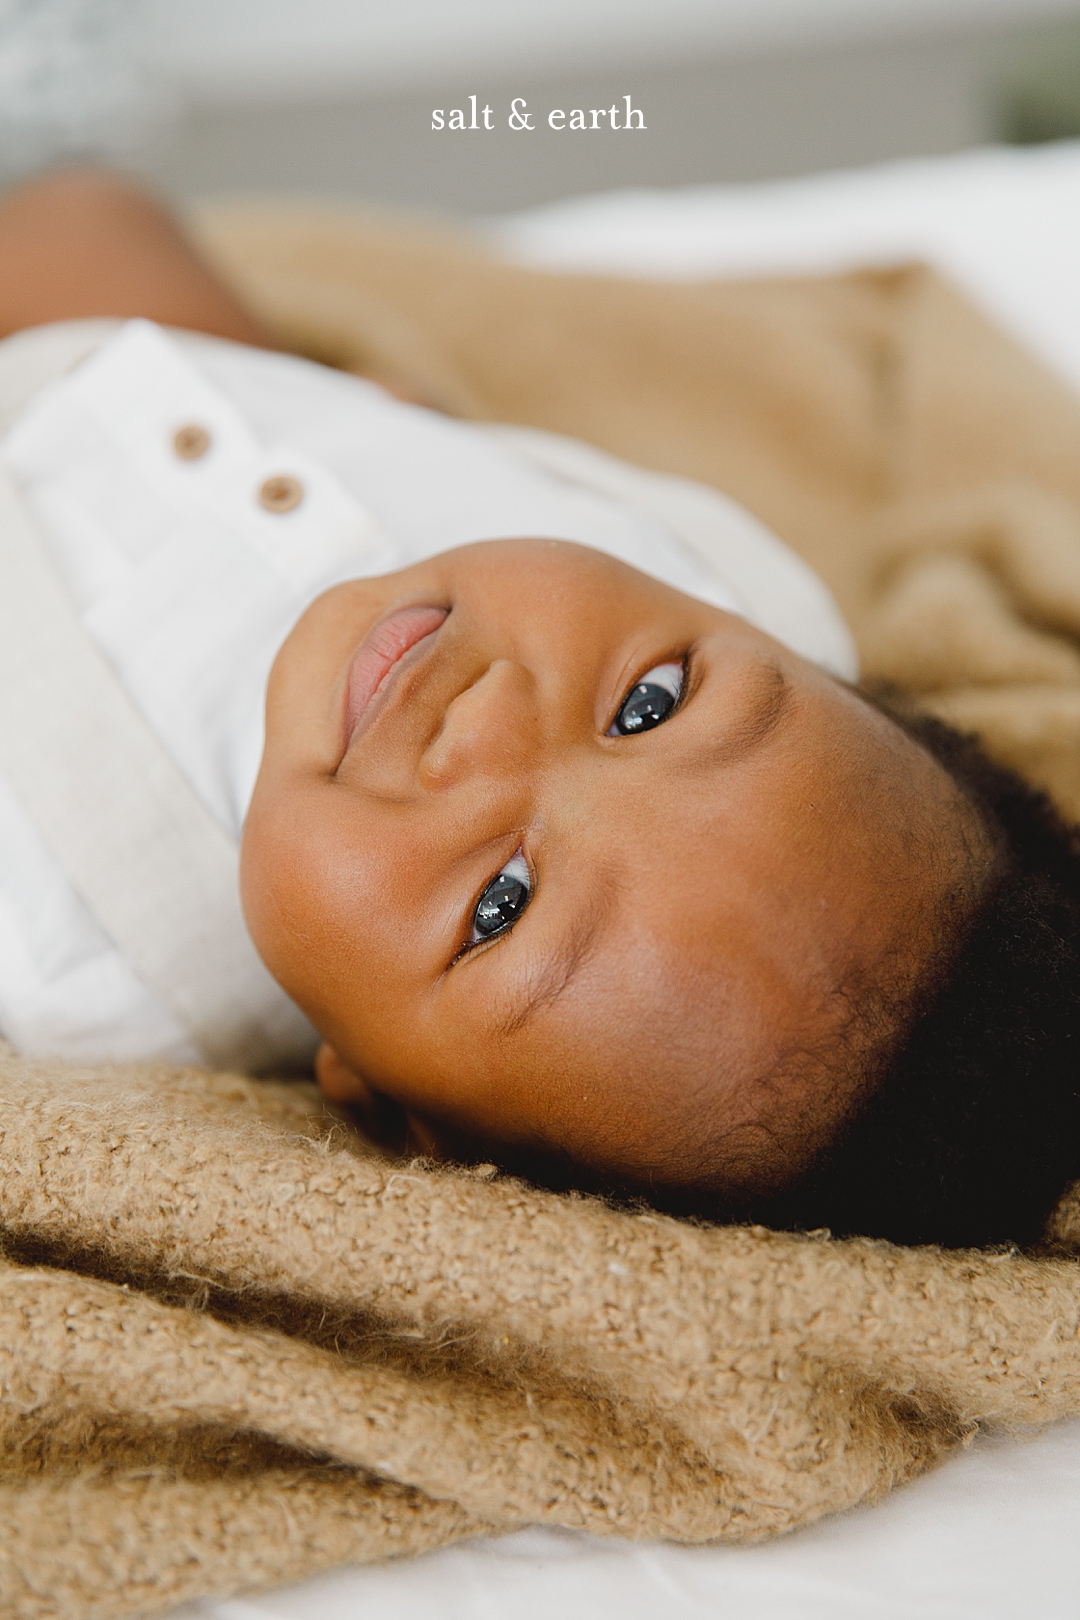 Baby Family session -Rosebank family phoography by Salt and Earth-165